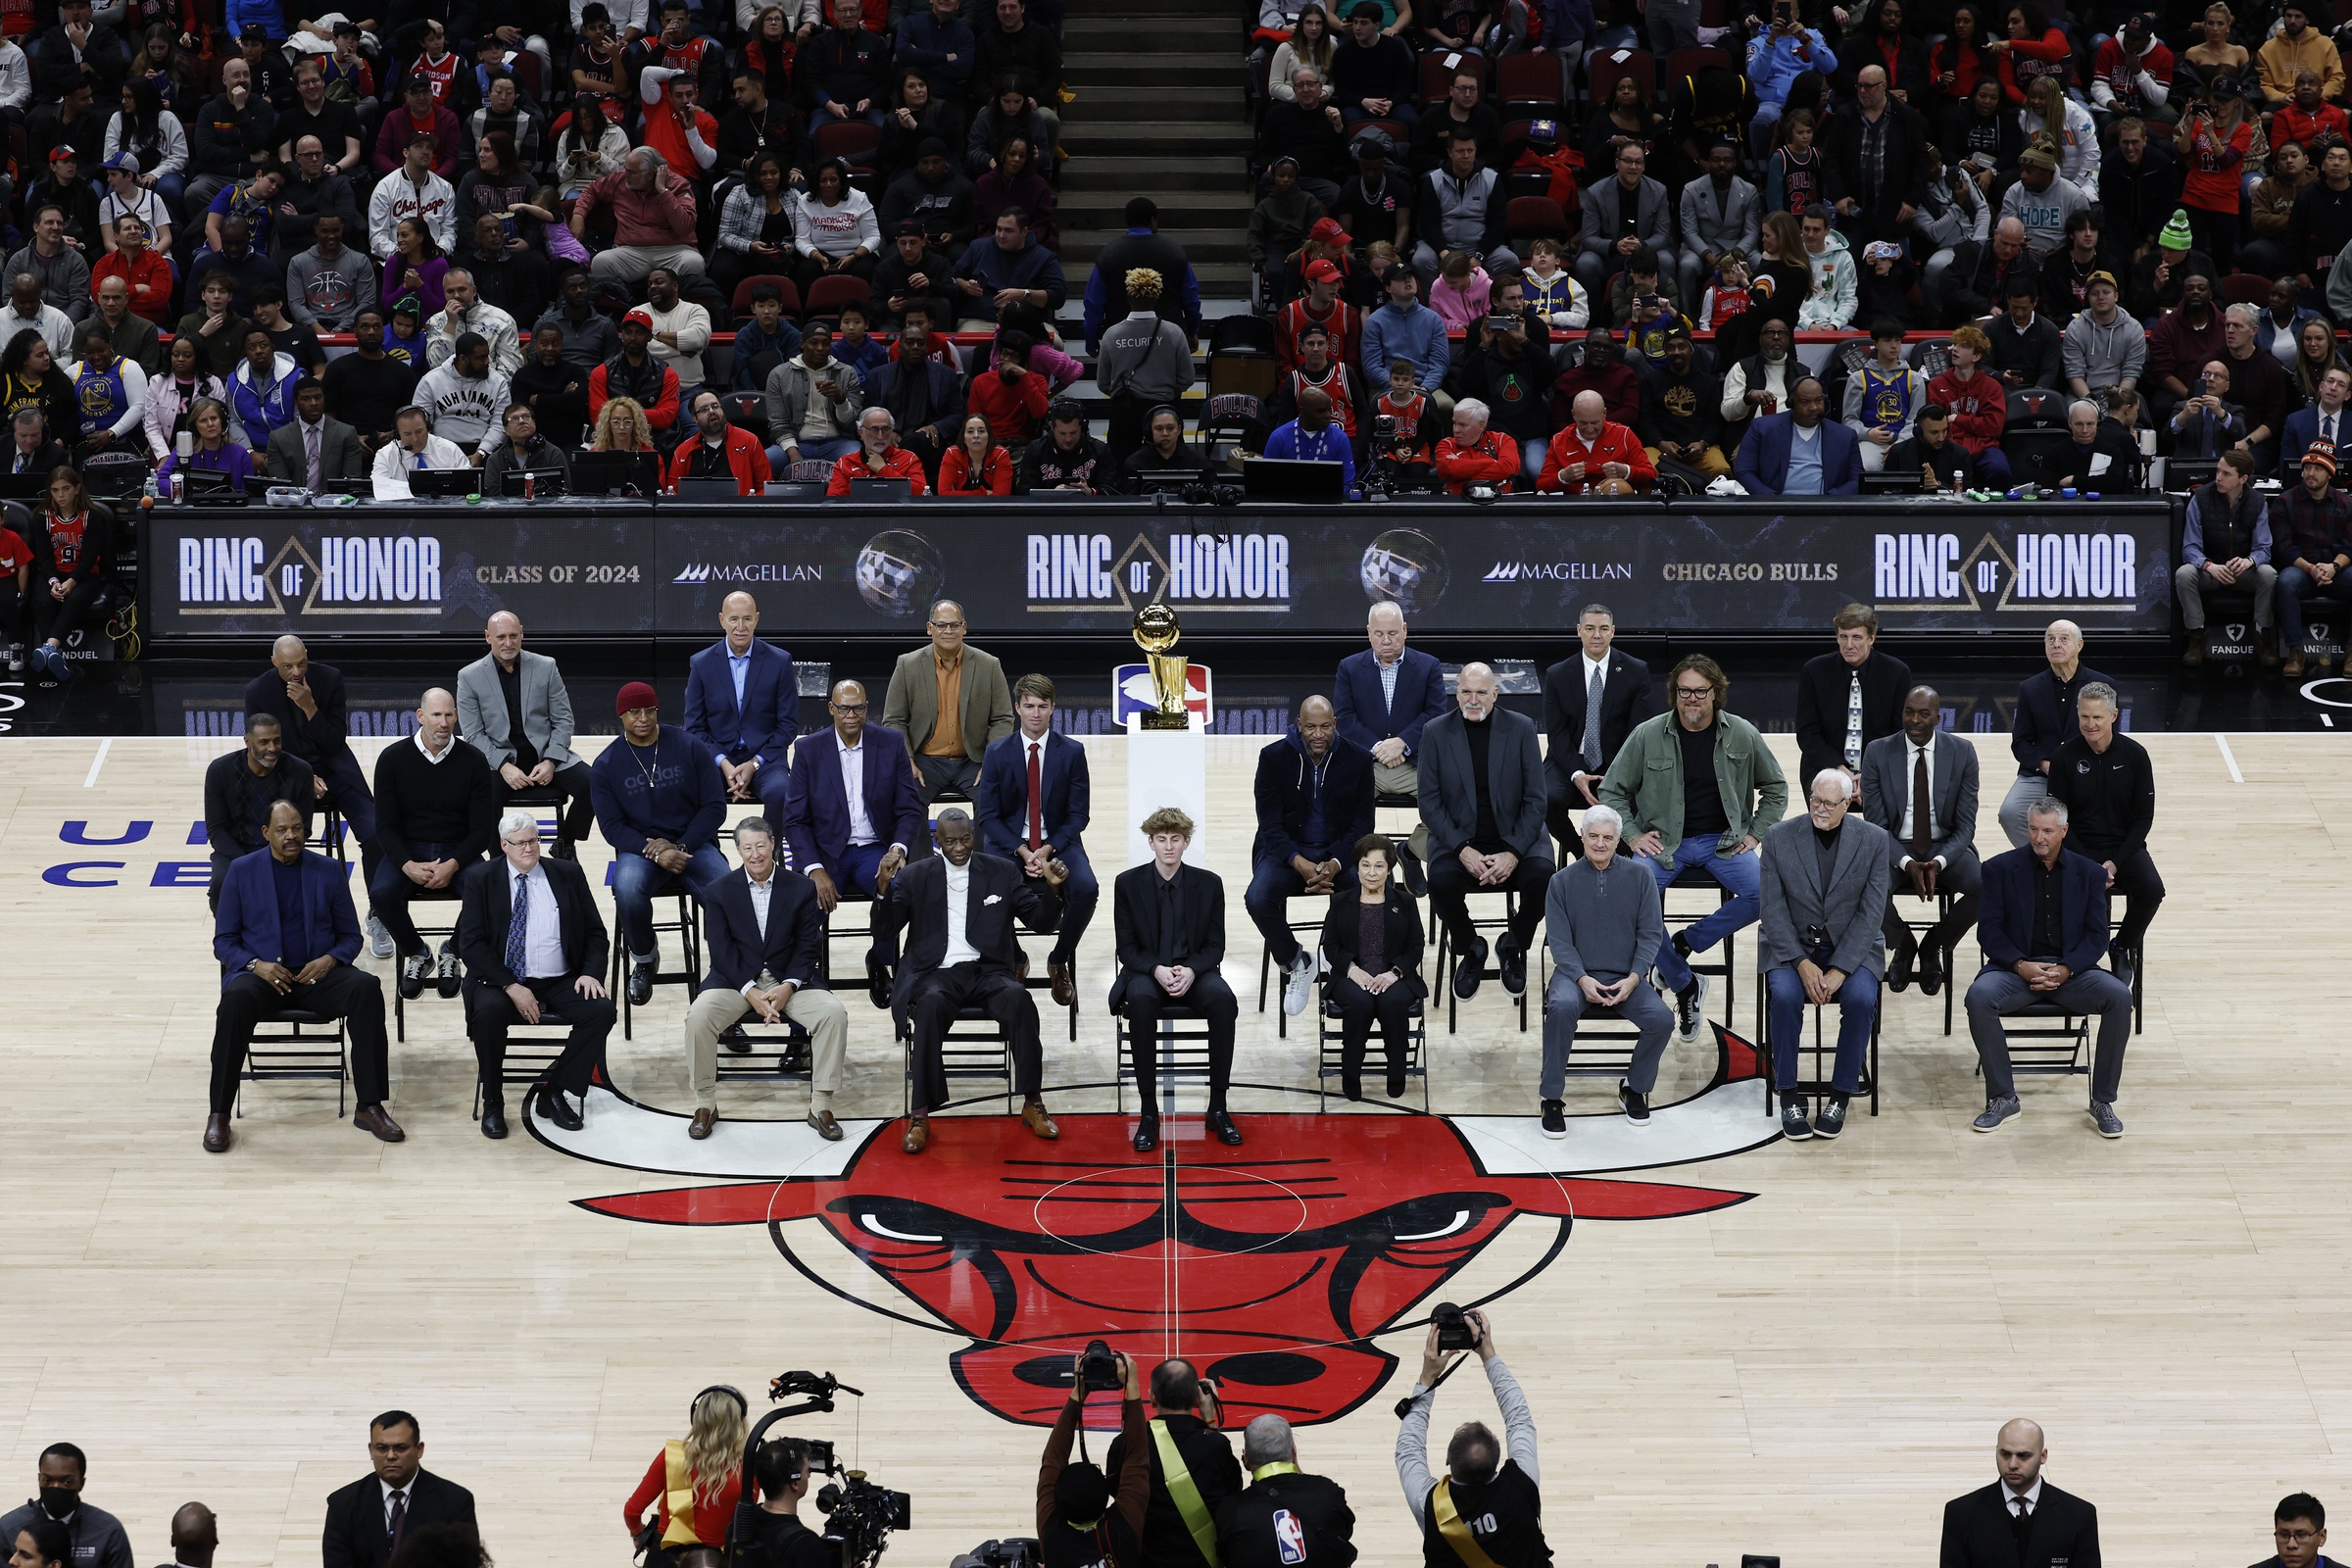 Chicago Bulls class of 2024 Ring of Honor inductees from left to right, (Back Row) Jim Cleamons, Erik Heiland, Ivika Duran, Clarence Gaines, Jr., John Ligmanowski, Chip Schaefer, Jim Stack, Al Vermeil (Middle Row) Randy Brown, Jud Buechler, Jason Coffey, James Edwards, Jack Haley, Jr., Ron Harper, Bill Wennington, Luc Longley, John Salley, Steve Kerr (Front Row) Artis Gilmore, Matt Kerr, Greg Klein, Bob Love, JJ Parrish, Thelma Krause, Chris Winter, Phil Jackson, Toni Kukoc are honored during the inaugural ceremony at halftime of a game between the Bulls and Golden State Warriors at United Center.